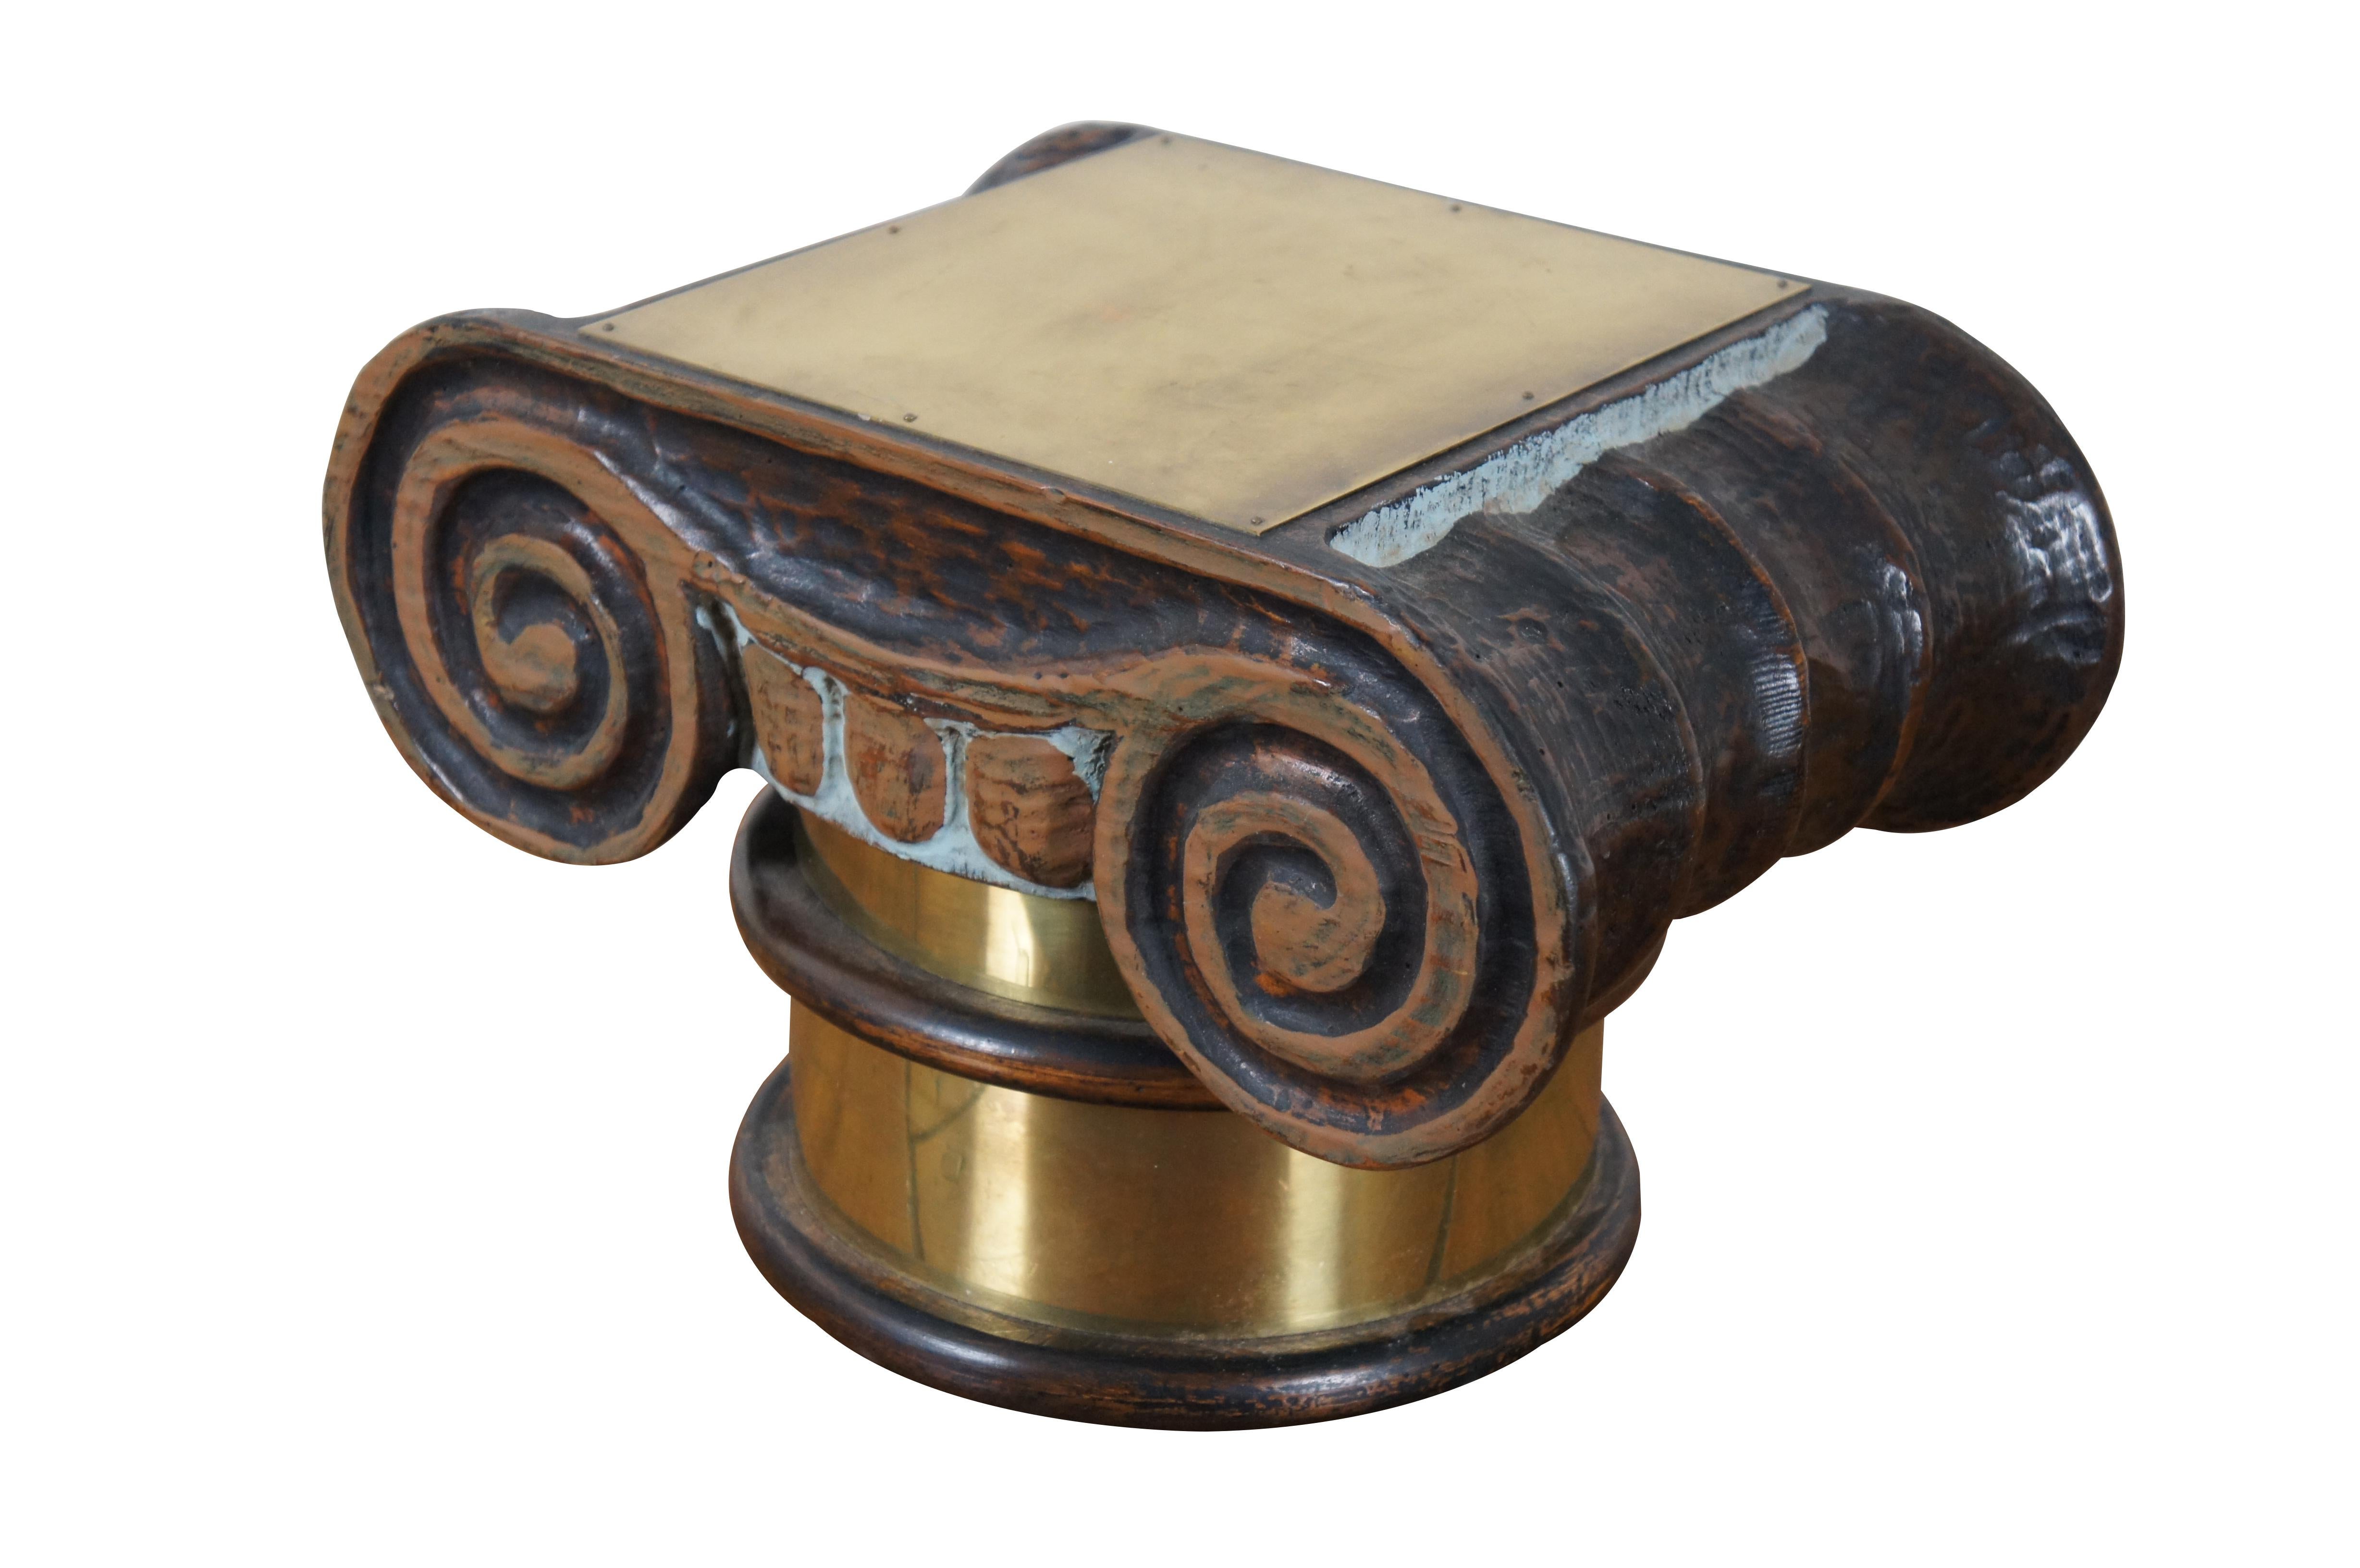 Vintage architectural / Neoclassical style plant stand / book / library / sculpture / display pedestal in the shape of the capital of an ionic corinthian column. Made of composite / resin painted in shades of brown, roughly resembling wood, with